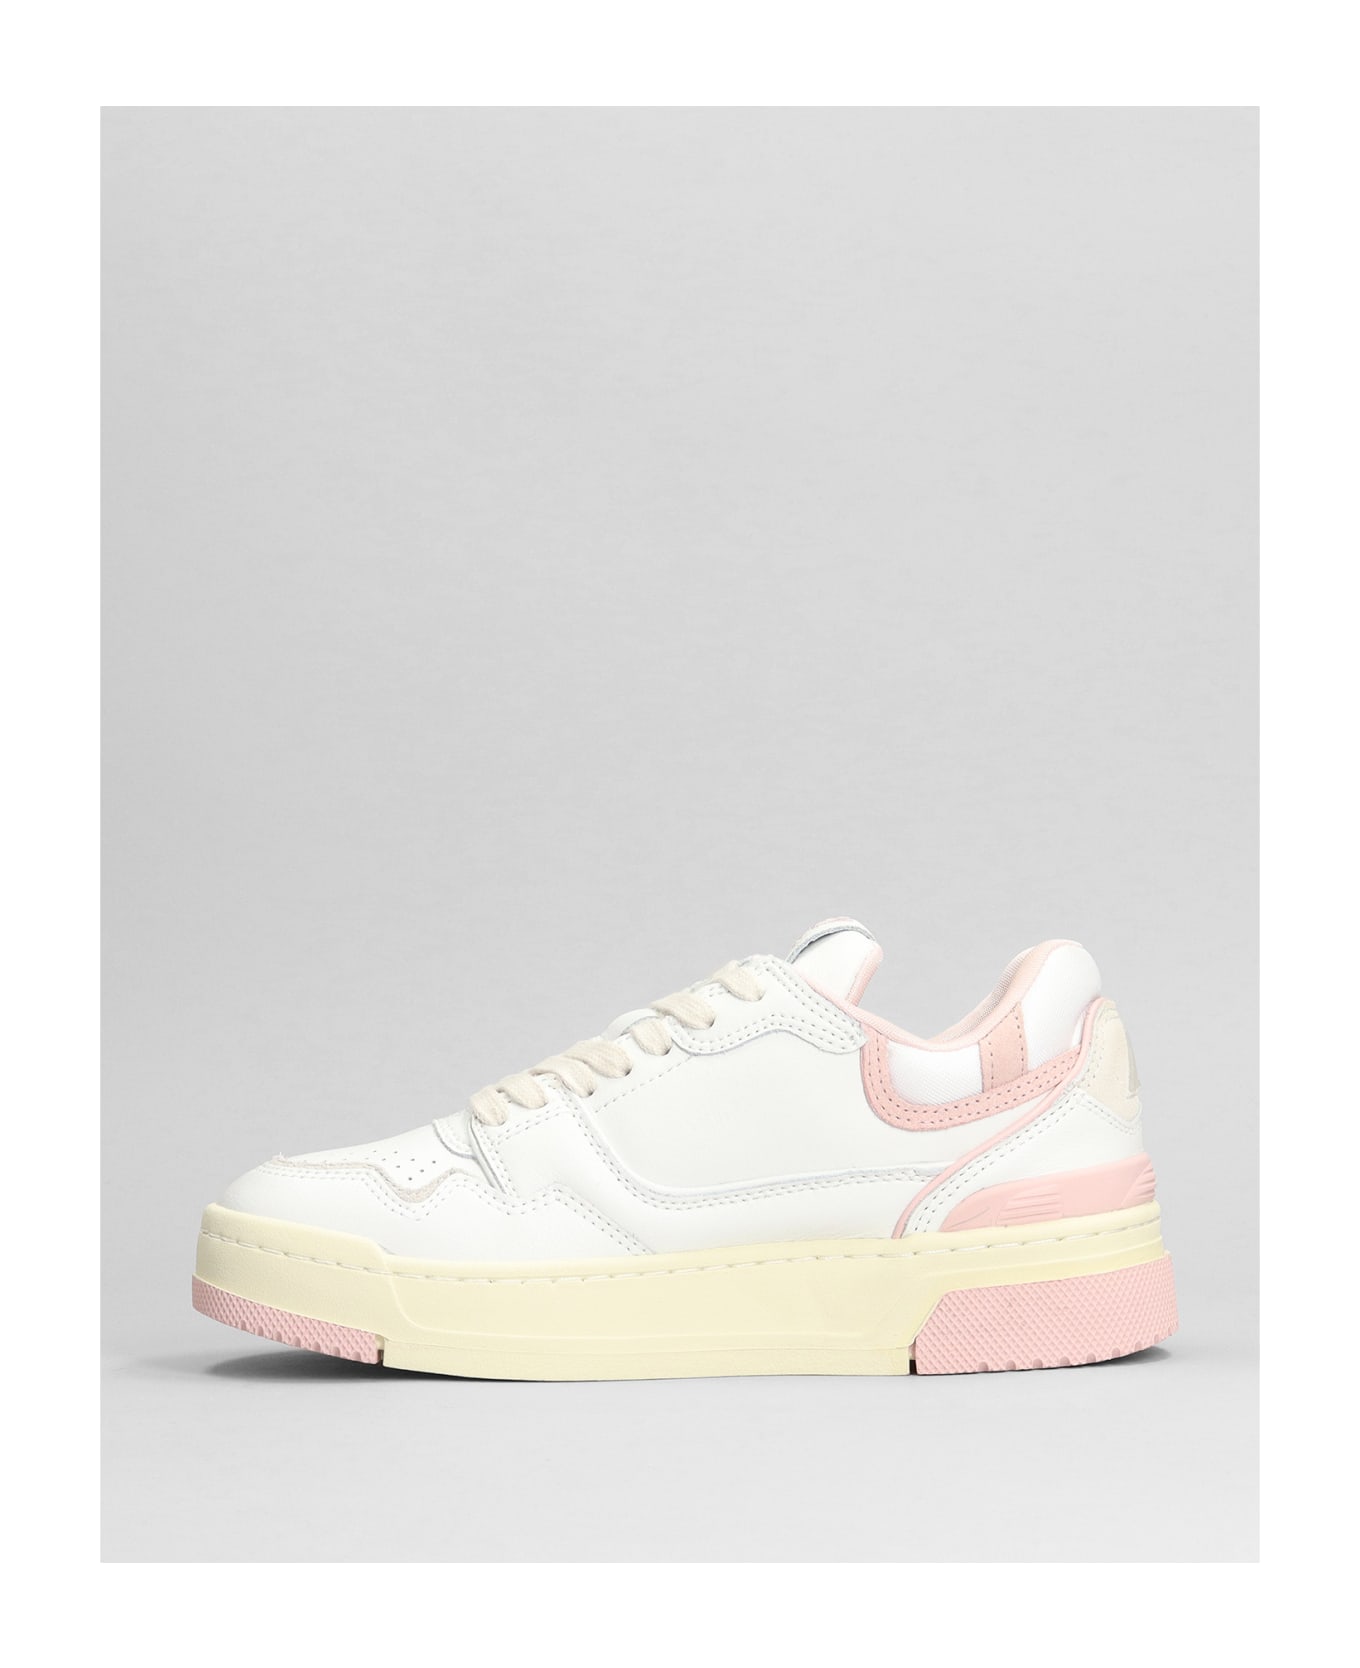 Autry Rookie Sneakers In White Leather - white